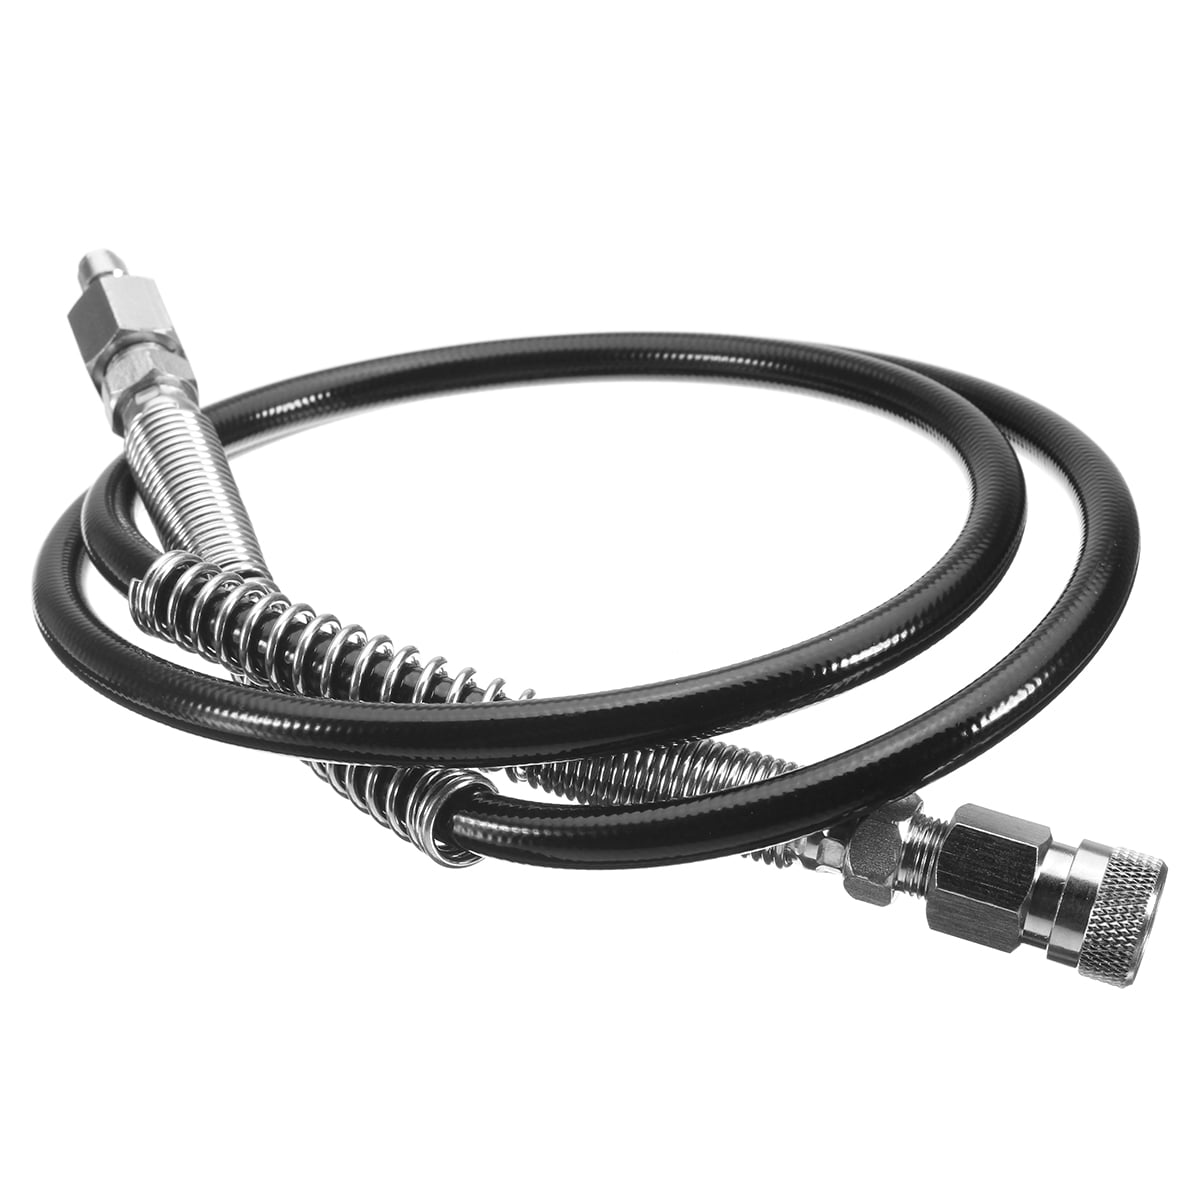 Paintball PCP Tank Metal Fill Whip High Pressure Air Fill Hose Tube 3000/4500psi